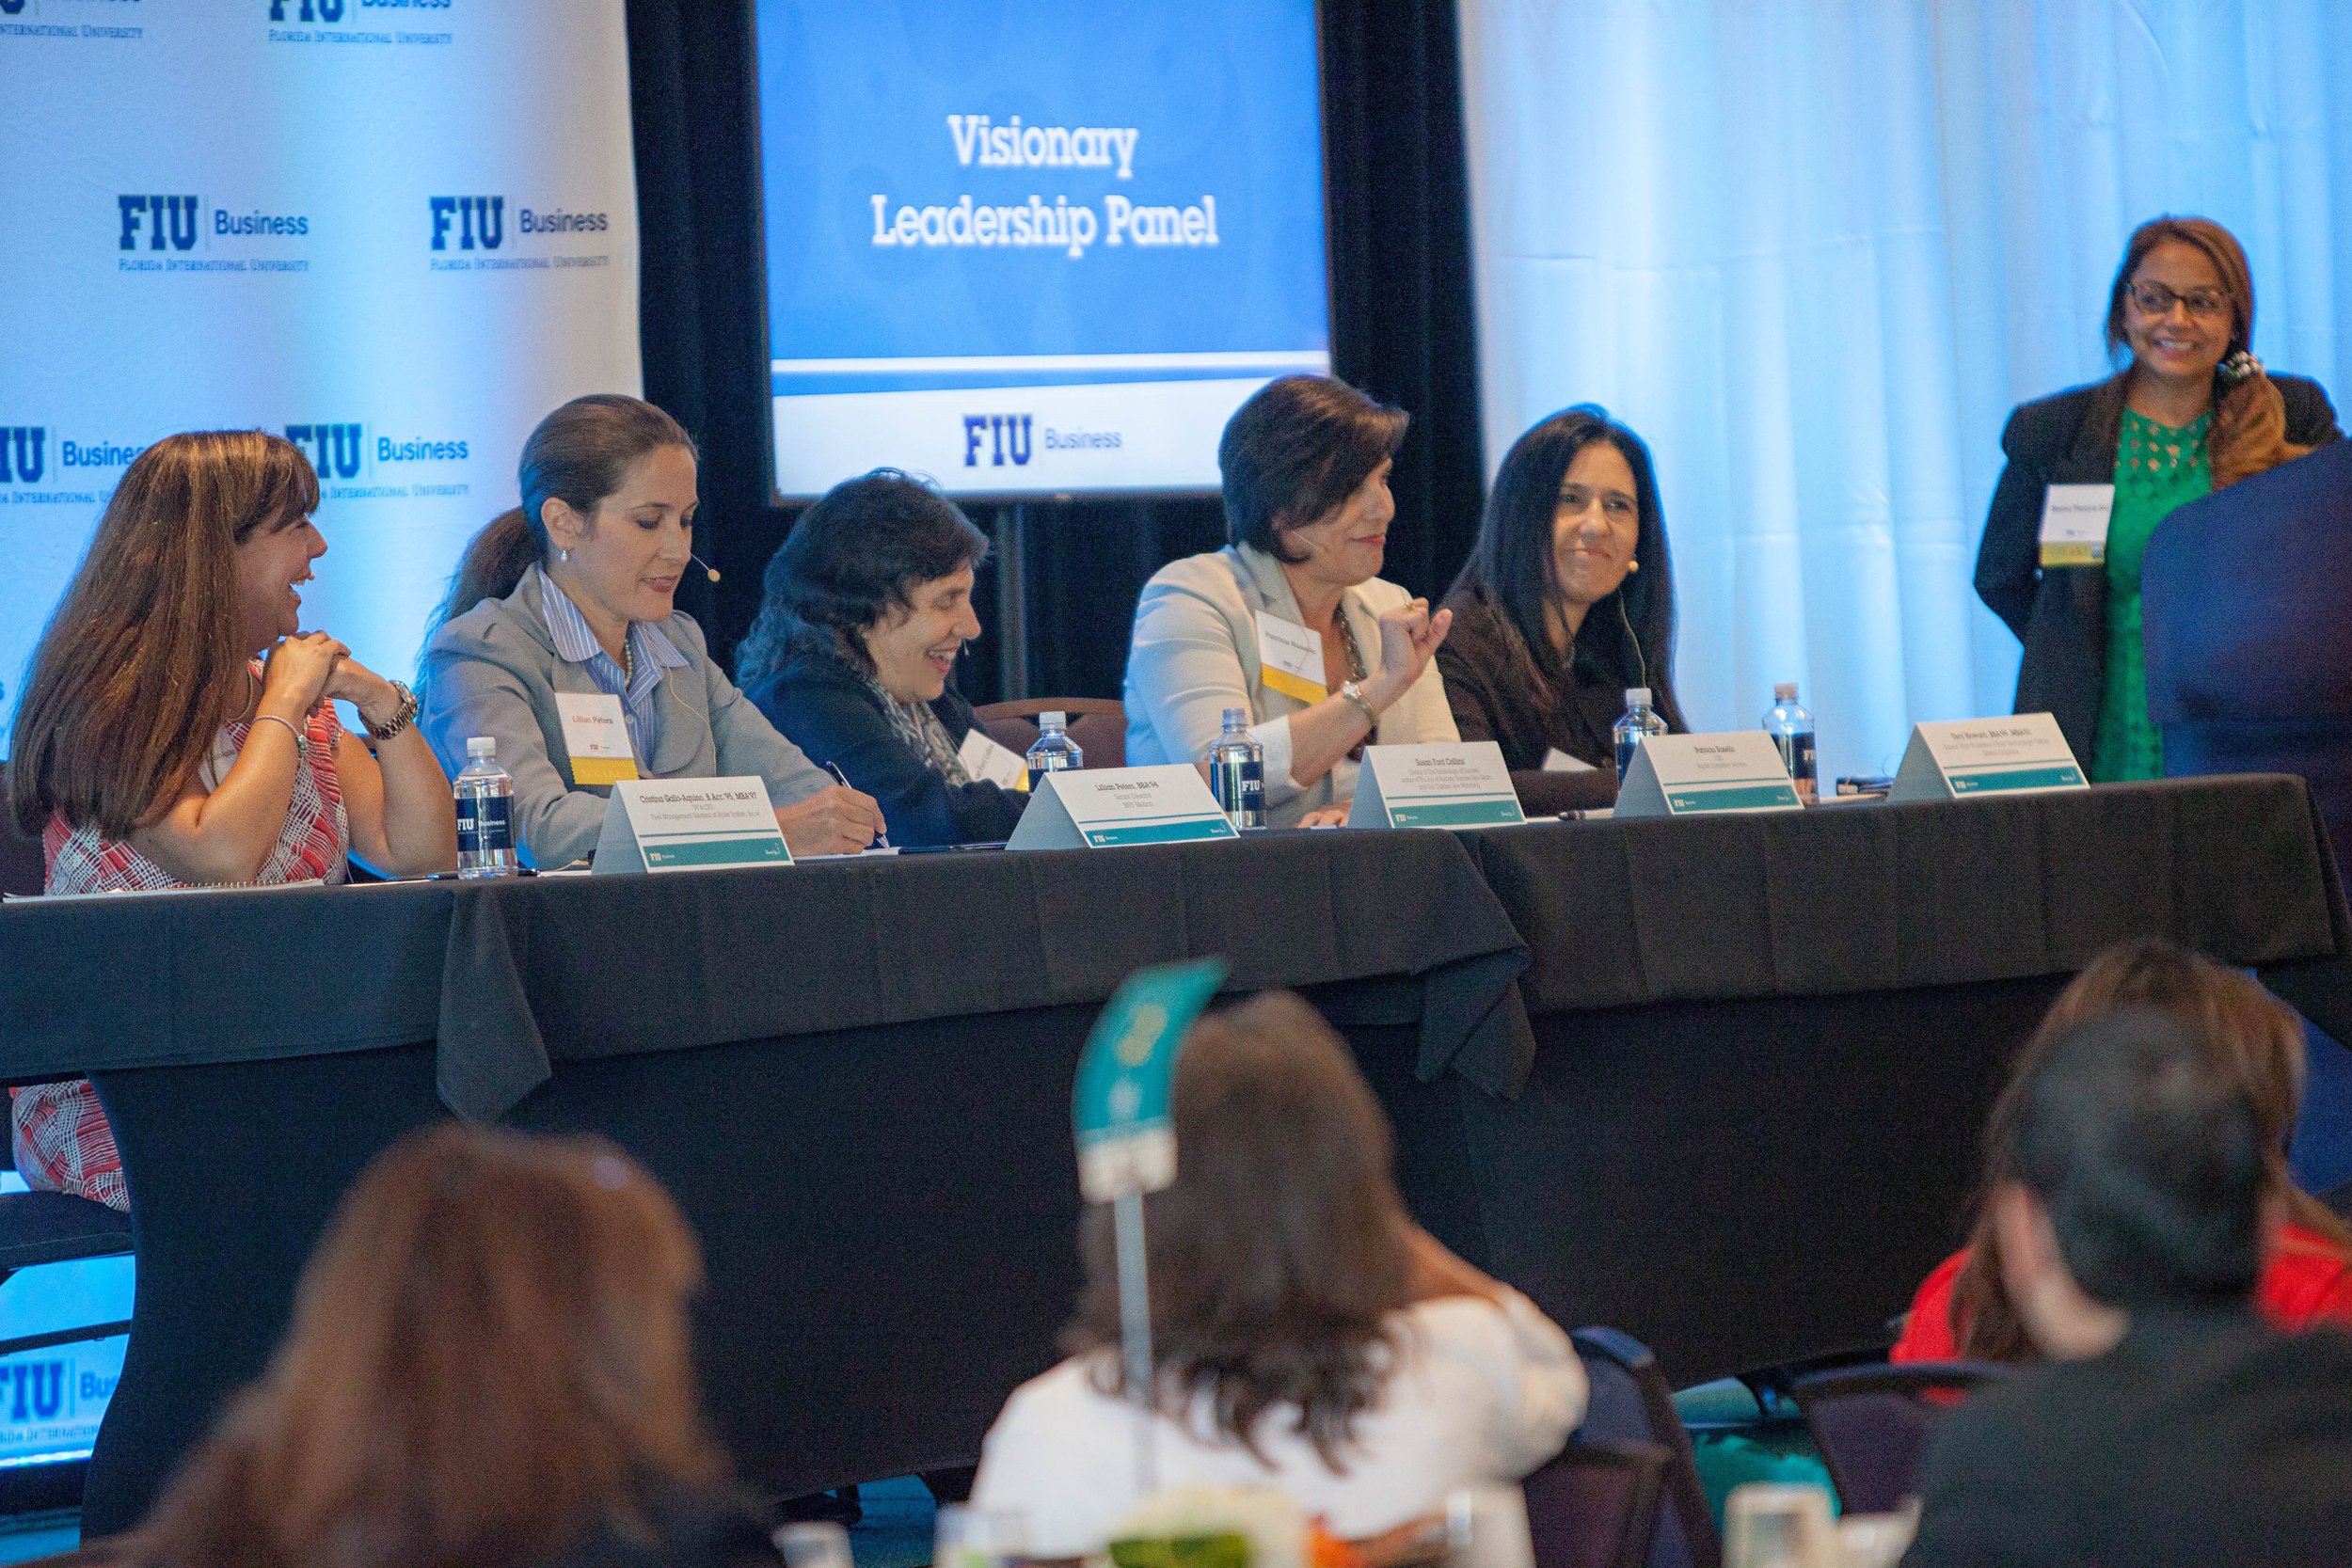 Copy of Visionary Leadership Panel FIU PowerUp Leadership Conference 2016